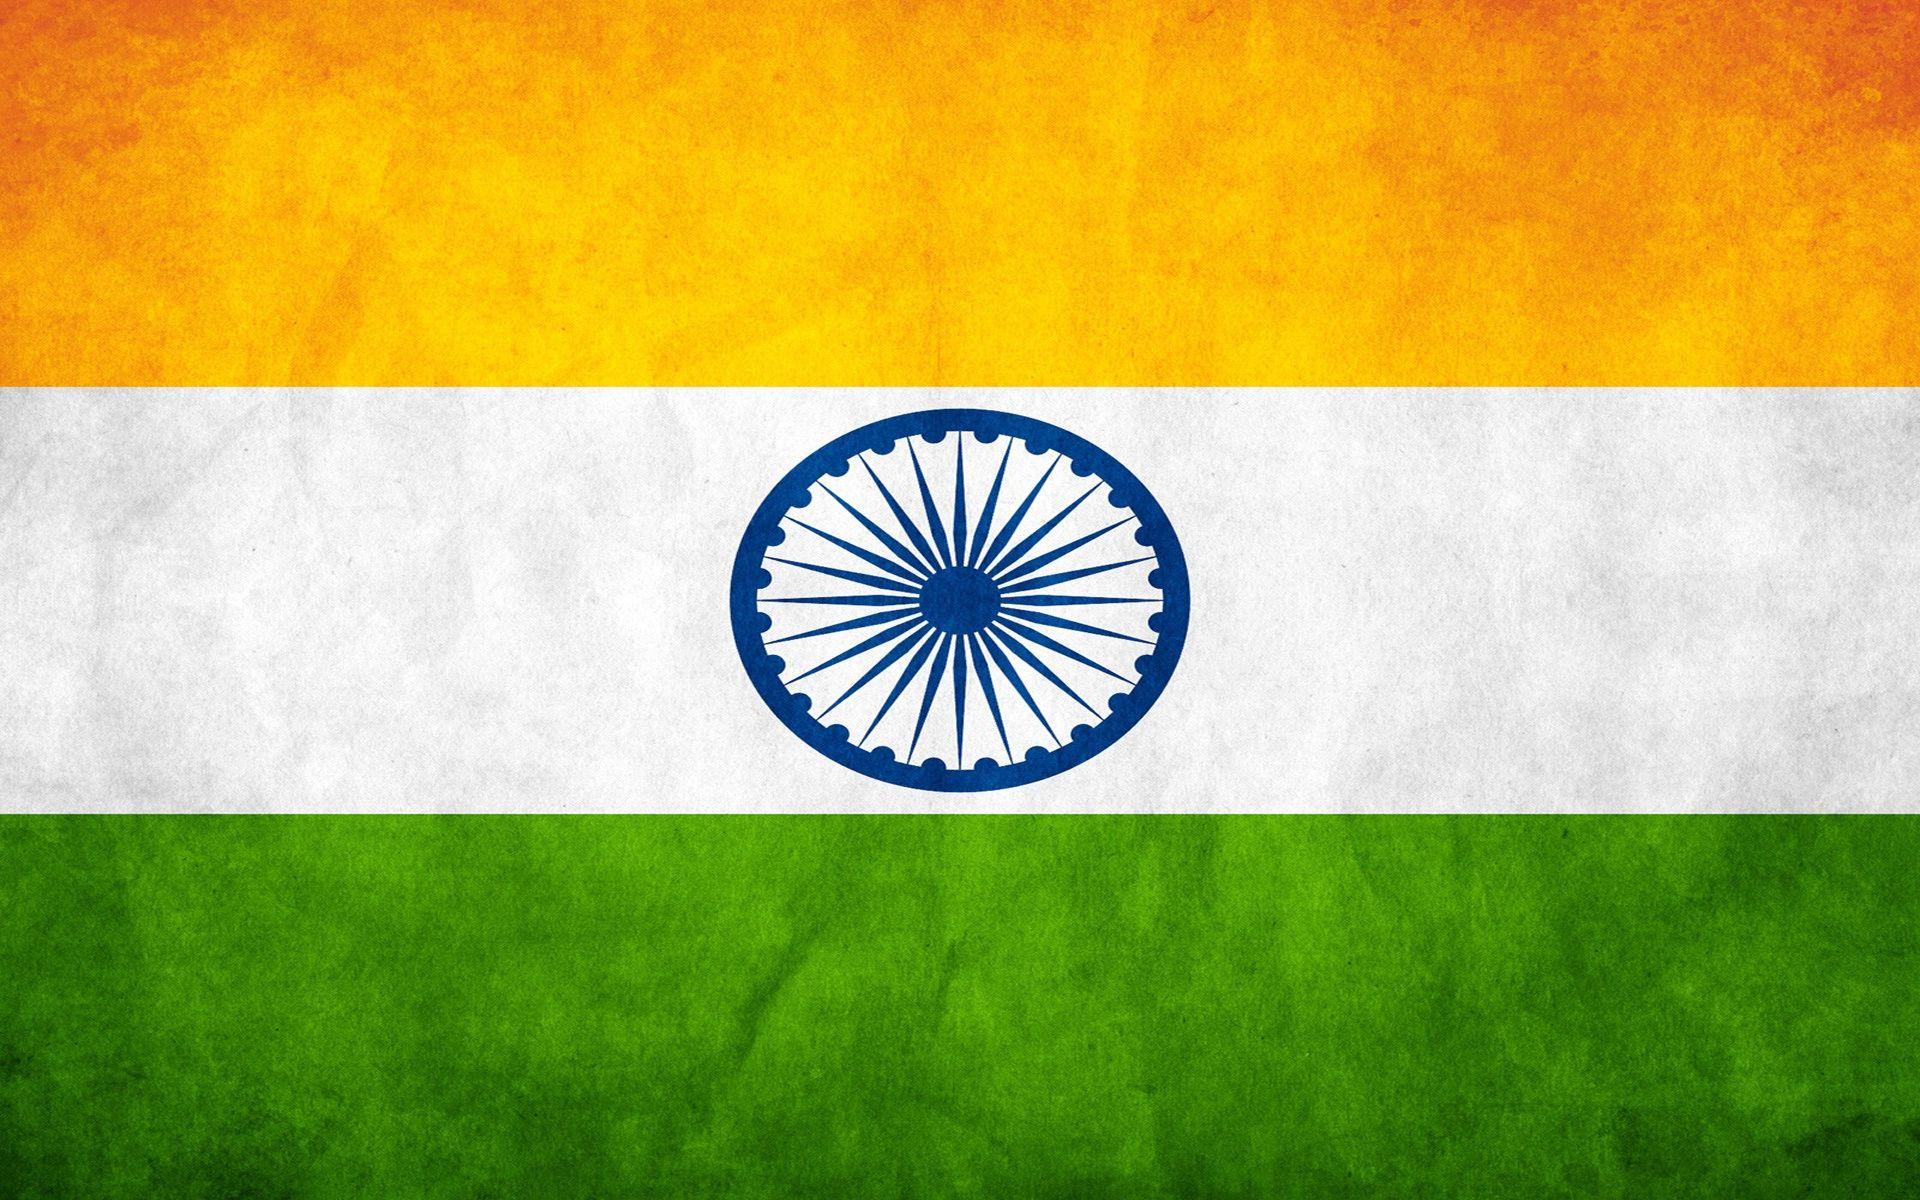 Wallpaper N Independence Day Amazing On India Flag Full HD Car High